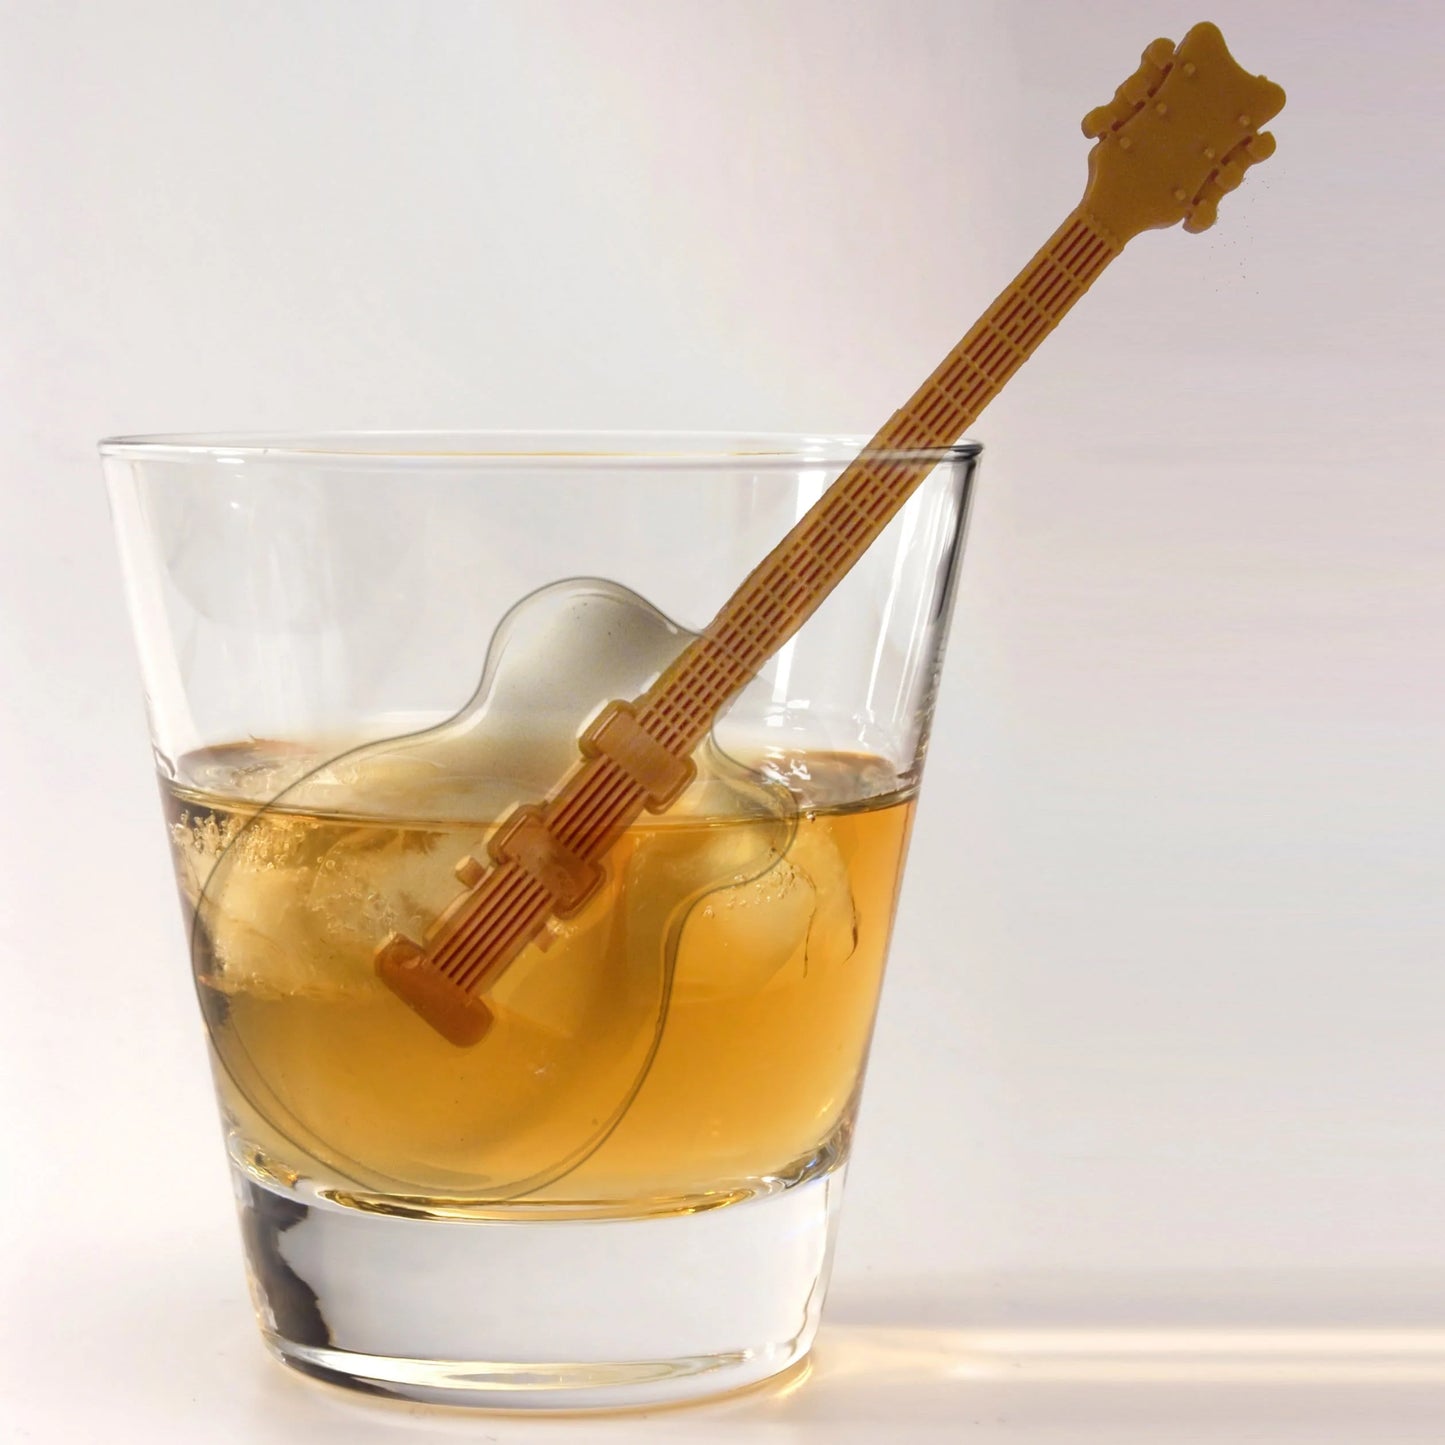 ice shaped guitar with stir stick in a beverage.